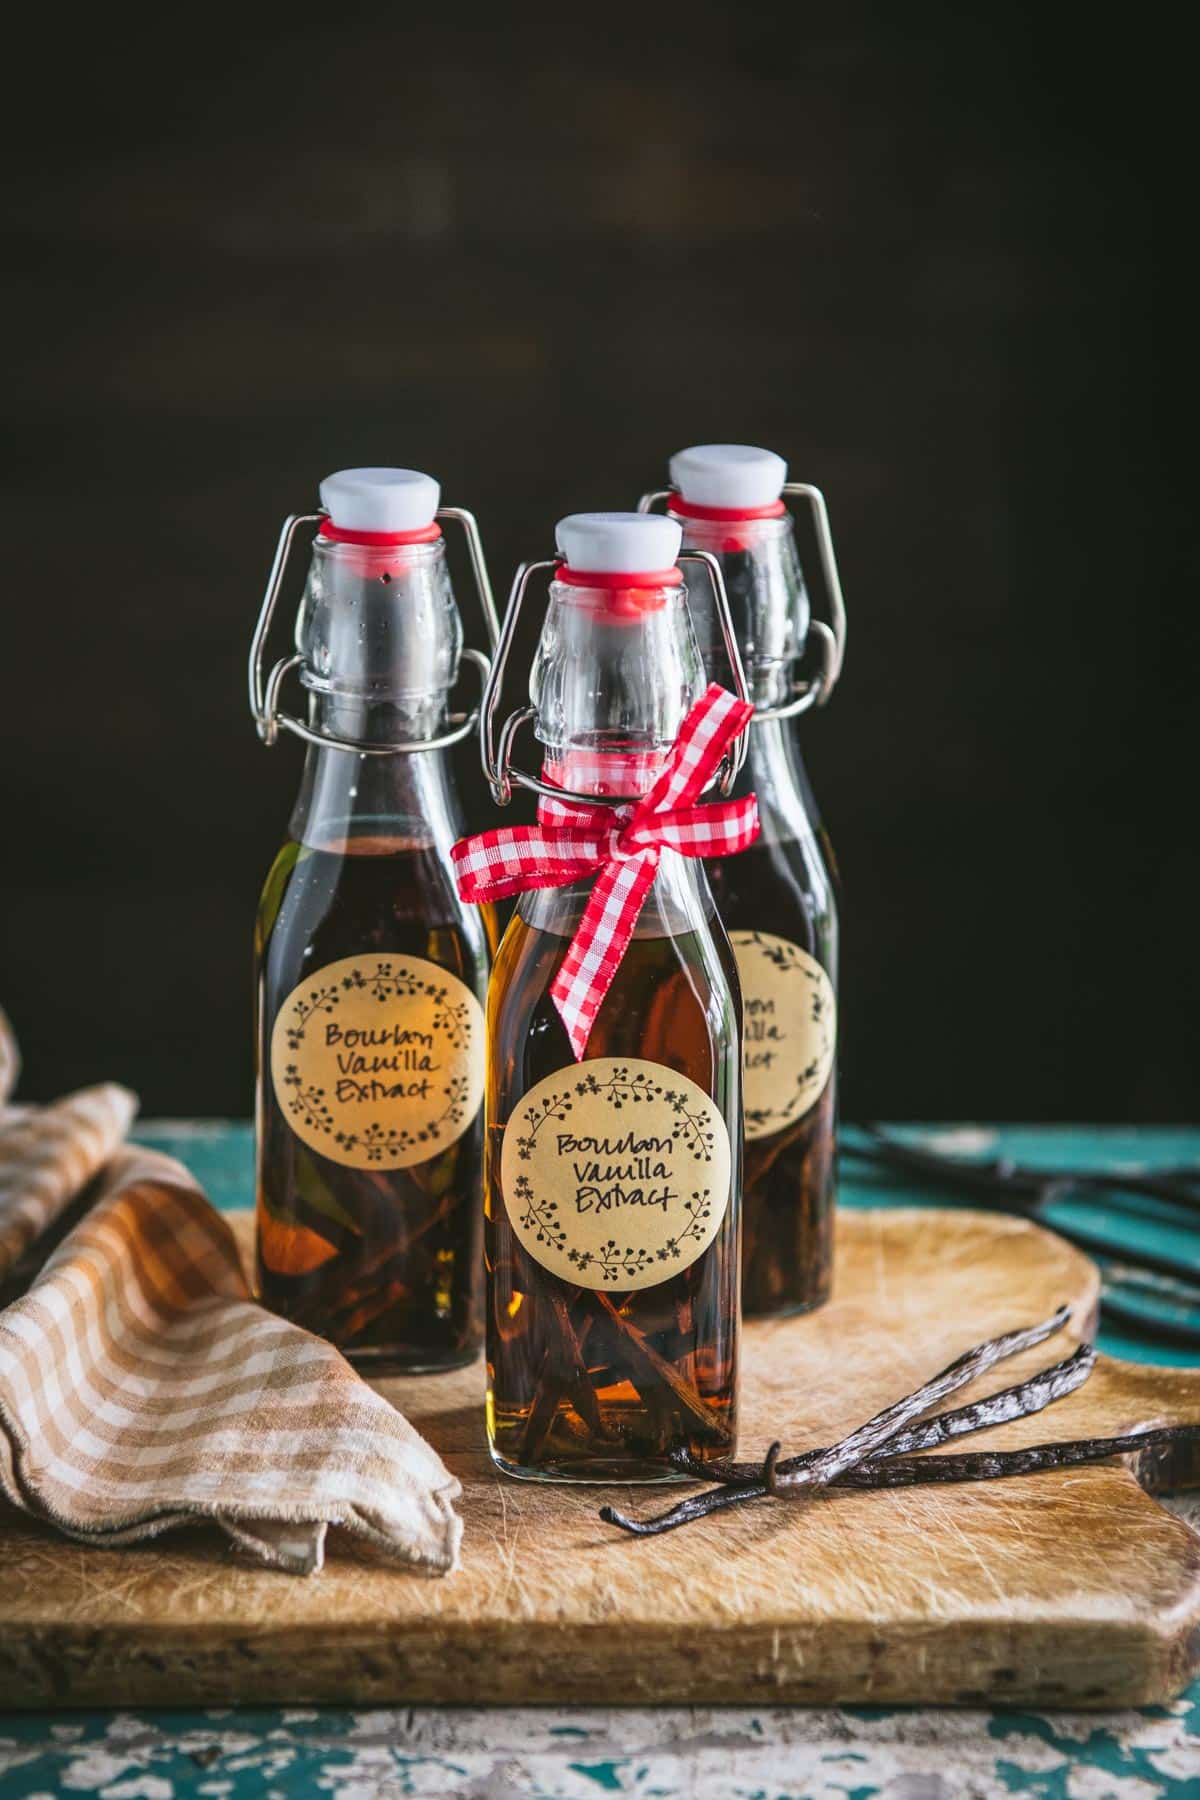 Photos showing how to make vanilla extract on a wooden cutting board.